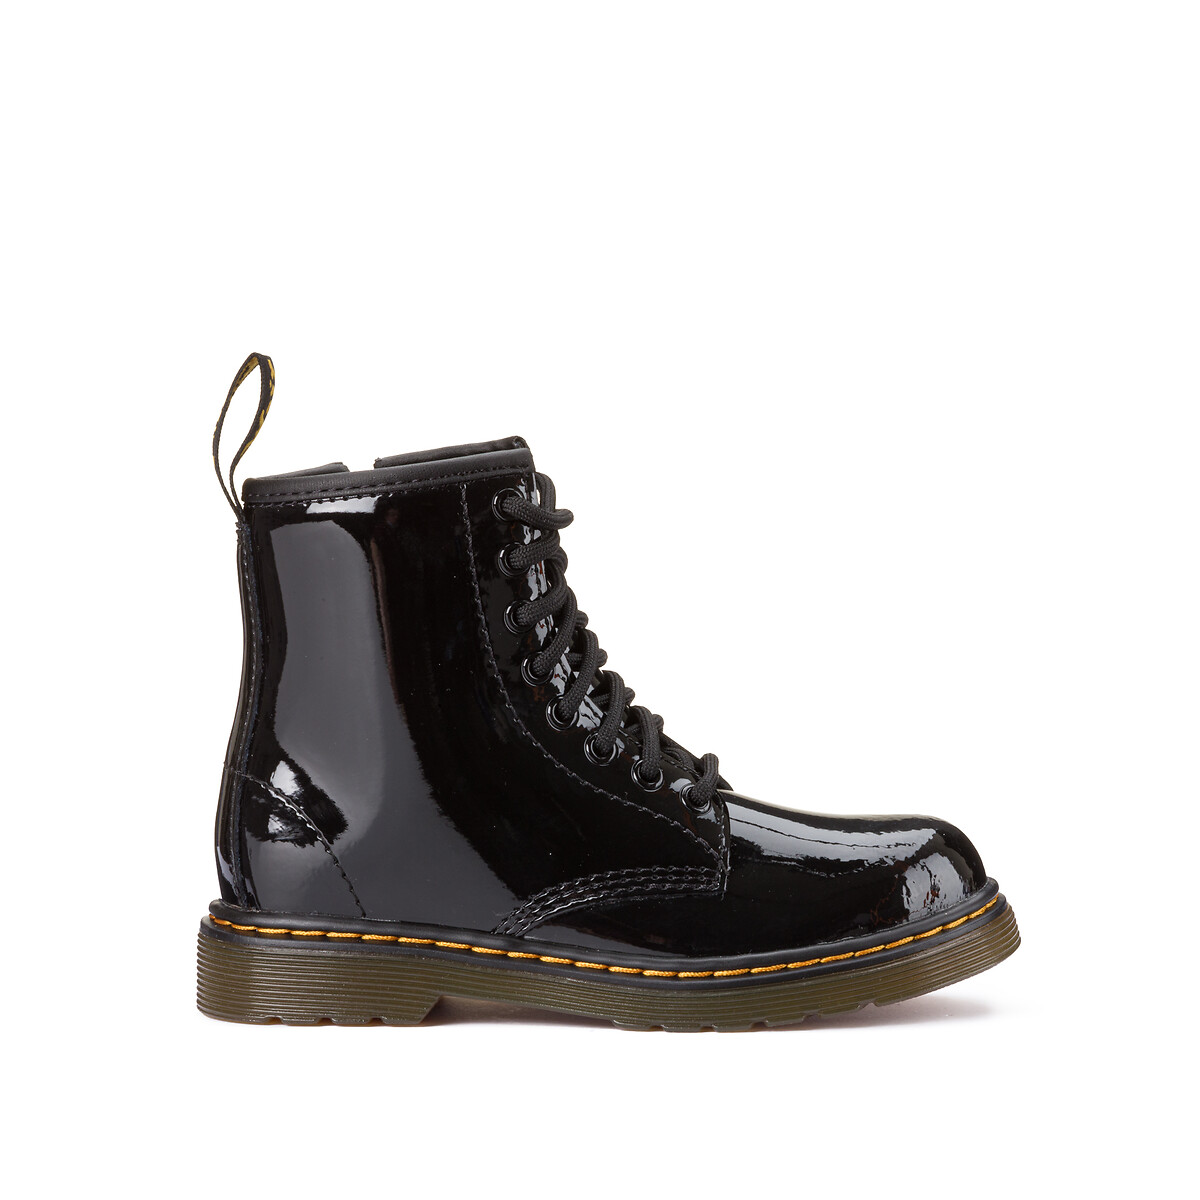 Image of Kids 1460 Junior Patent Leather Ankle Boots